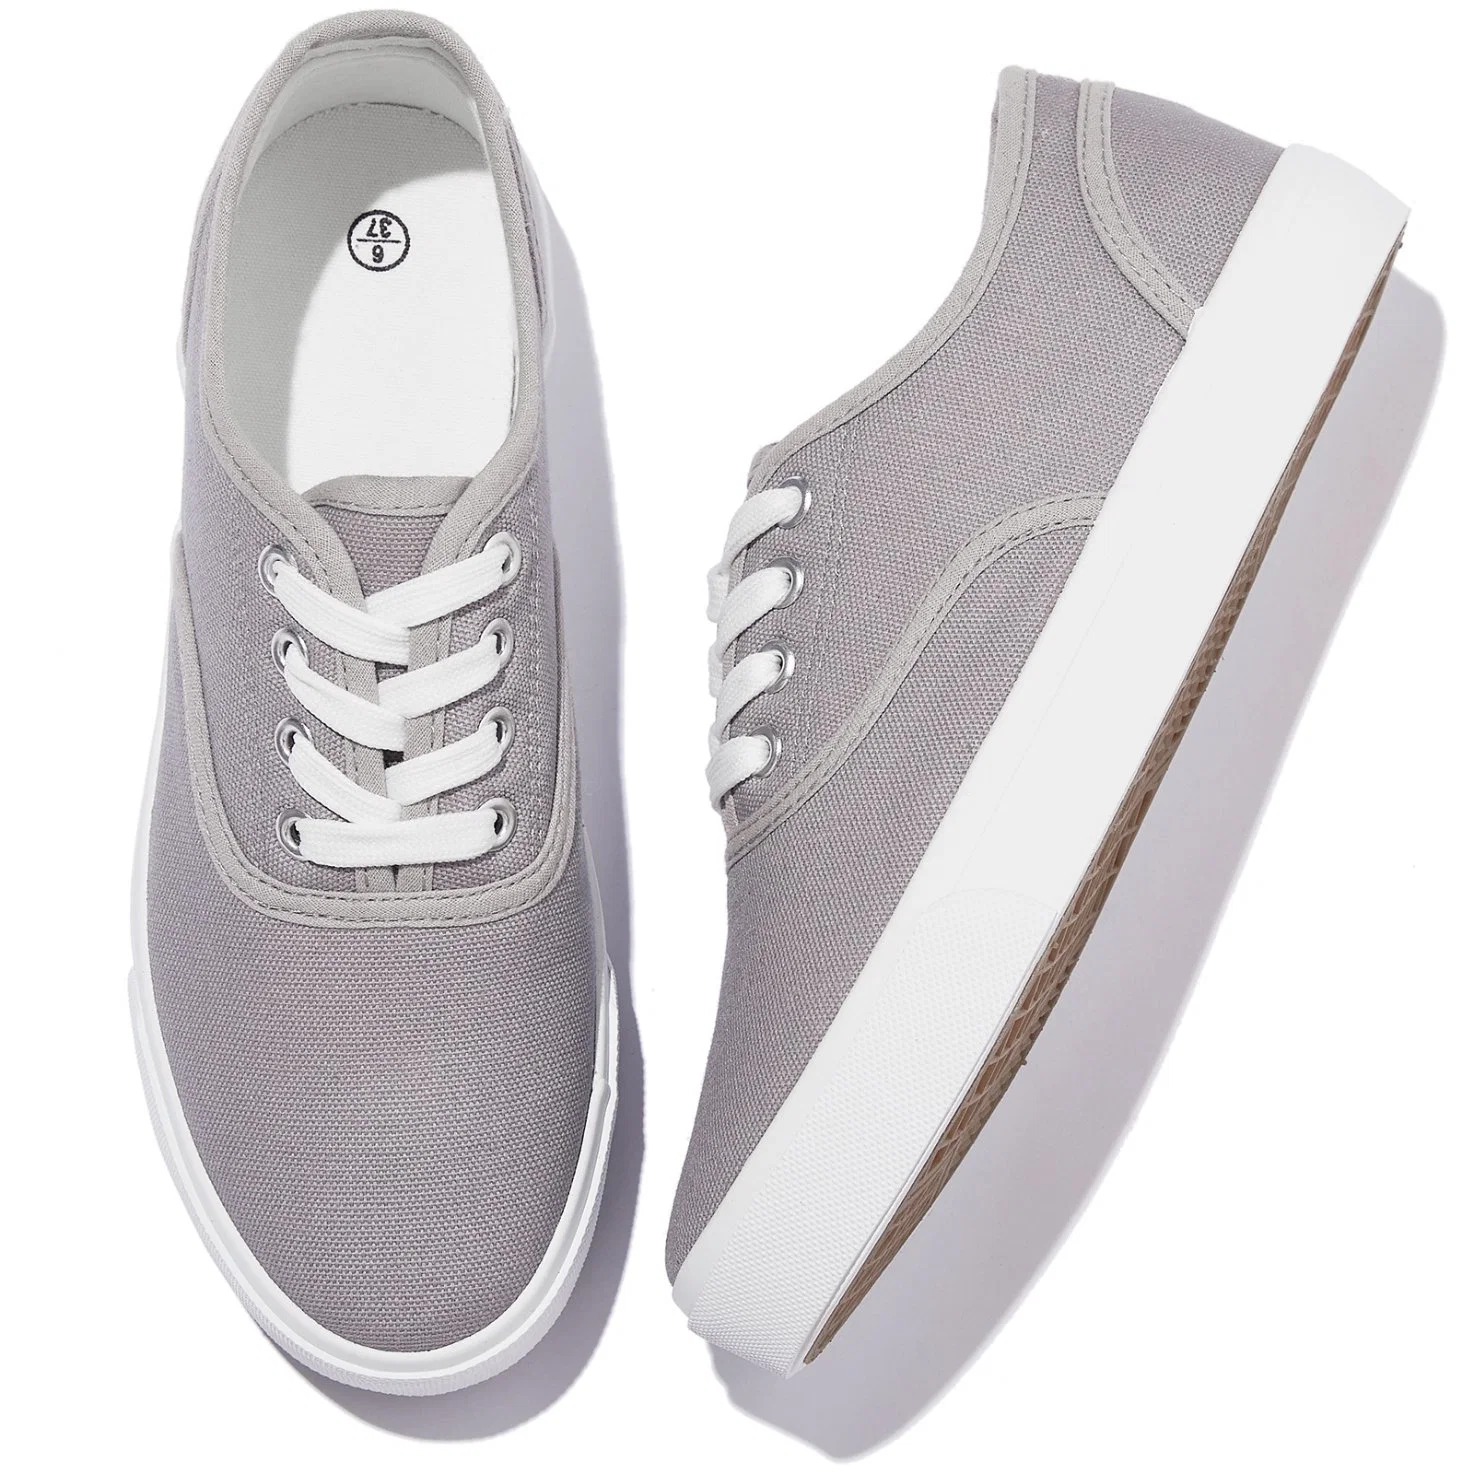 Grey Outdoor Walking Casual Shoes Casual Fashion Canvas Shoes